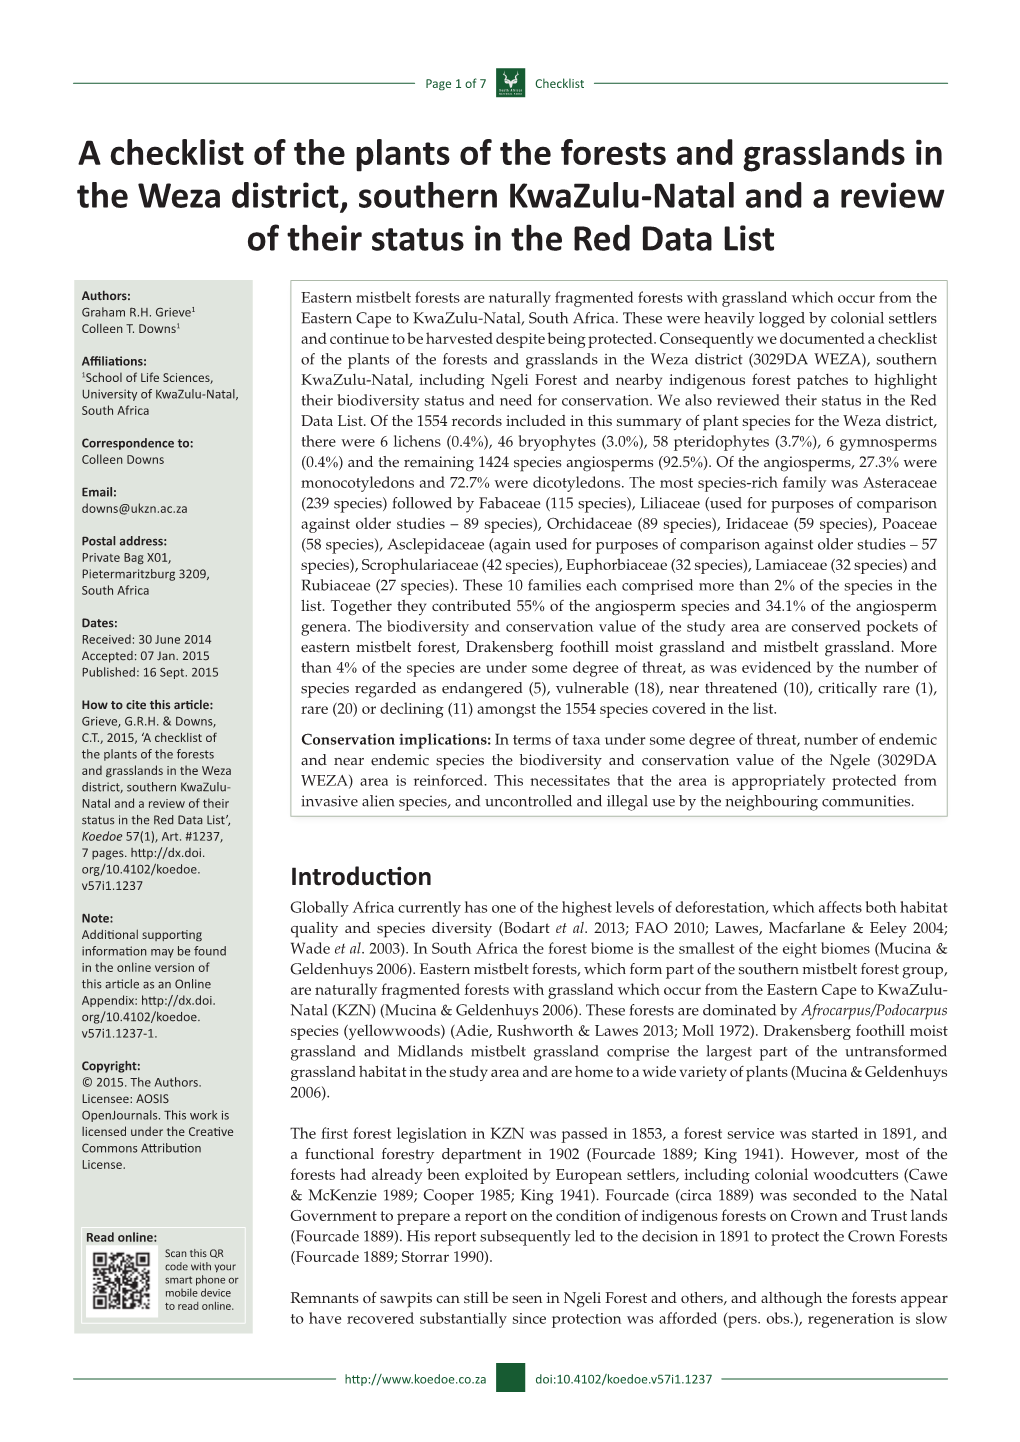 A Checklist of the Plants of the Forests and Grasslands in the Weza District, Southern Kwazulu-Natal and a Review of Their Status in the Red Data List